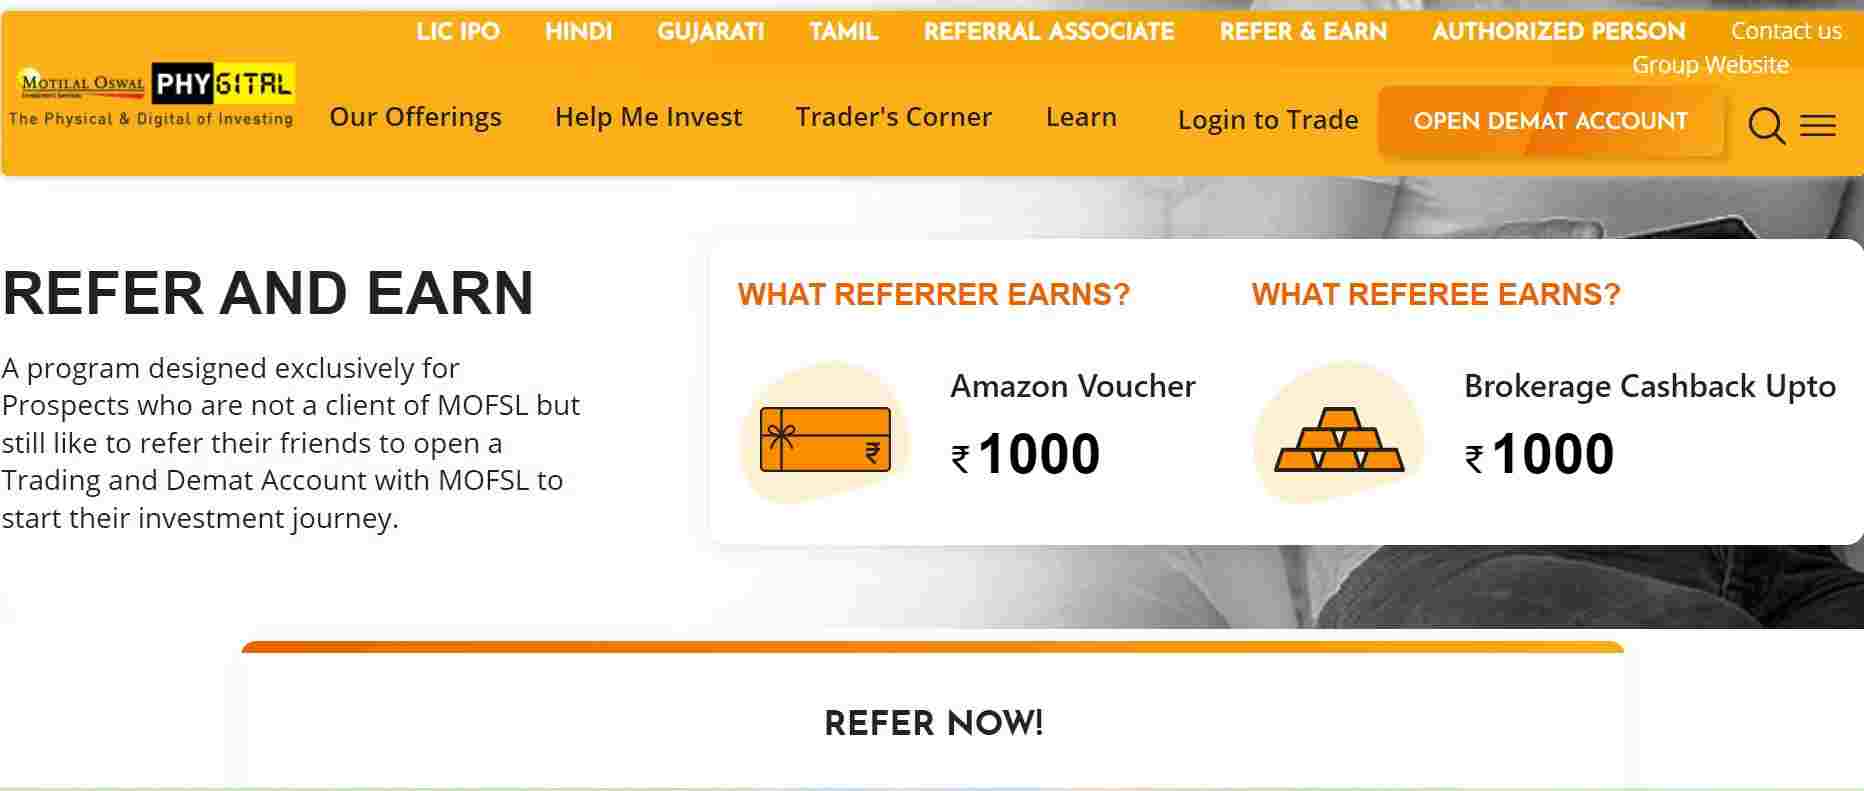 Motilal Oswal Refer and Earn